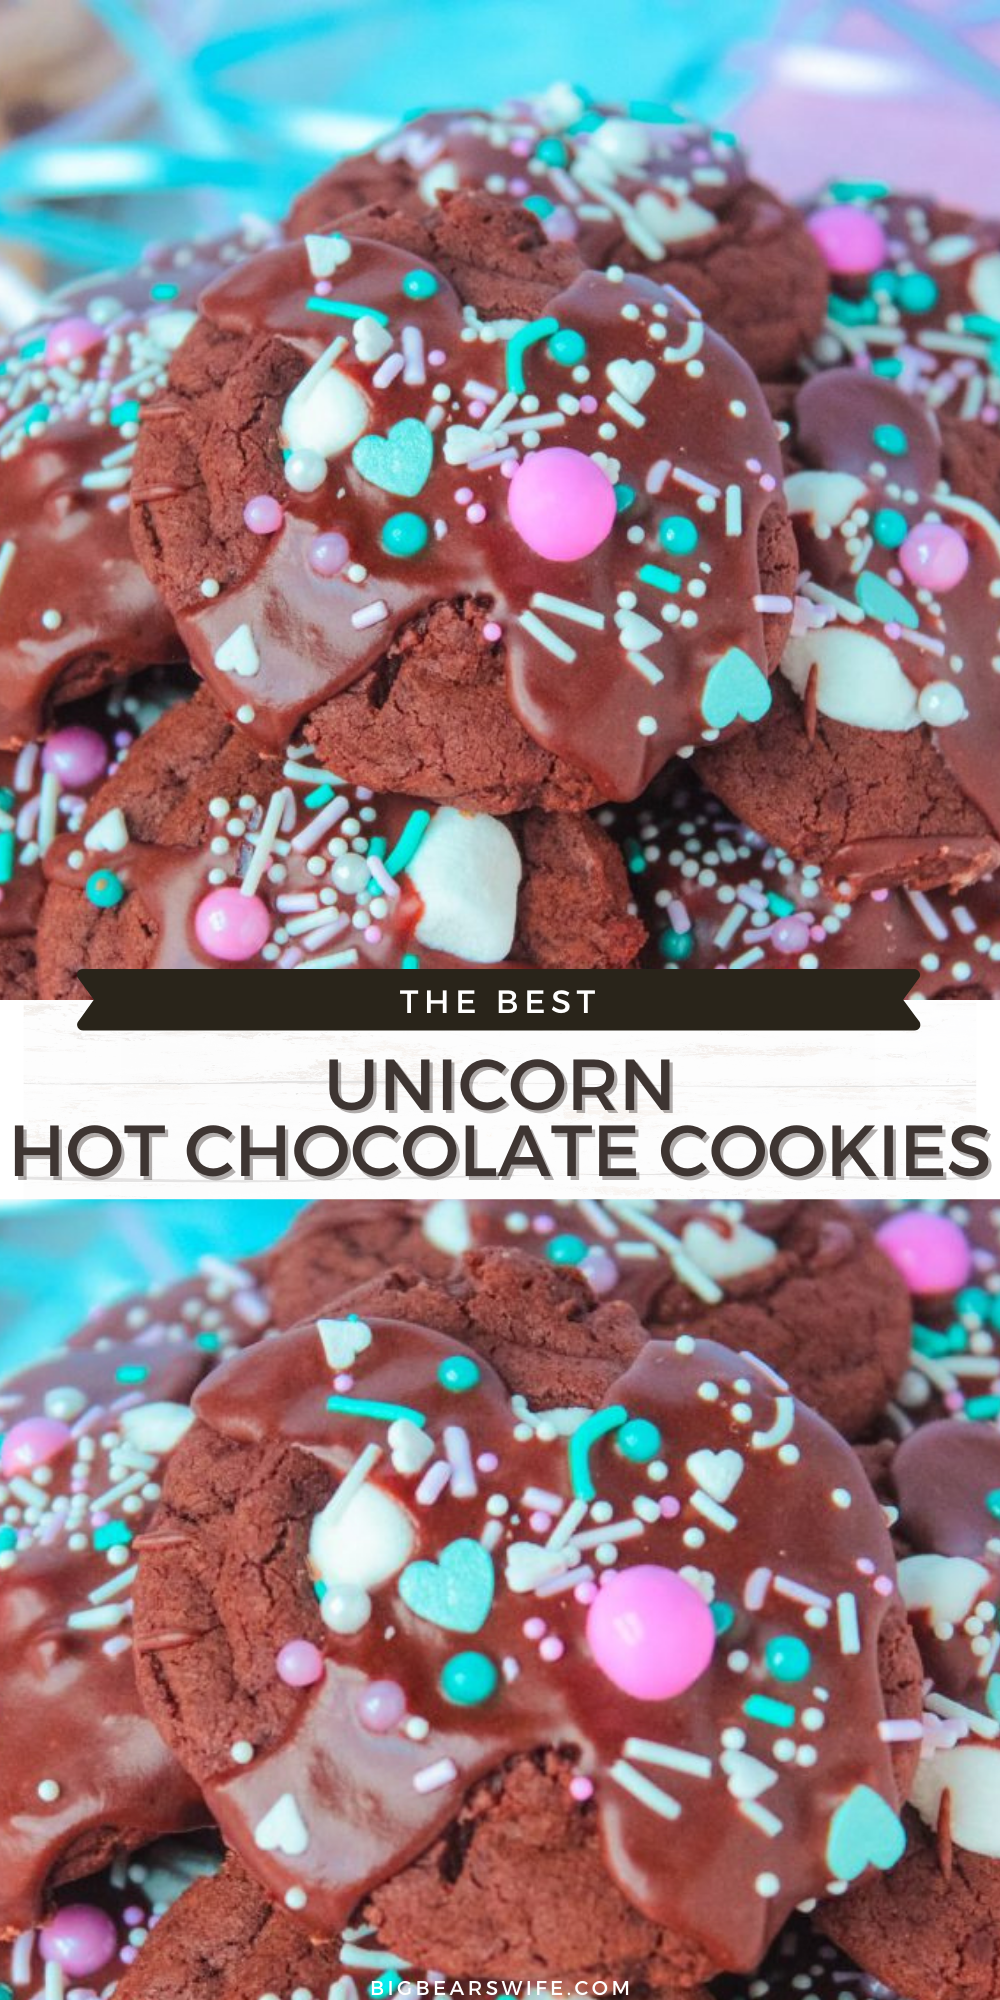 Hot Chocolate Cookies are the MOST requested dessert at our parties and cookout outs! This version is what I like to call “Unicorn Hot Chocolate Cookies”. Just like my Christmas cookies, they’re rich chocolate cookies with melted marshmallows stacked on top with a chocolate glaze drizzle and sprinkles! via @bigbearswife